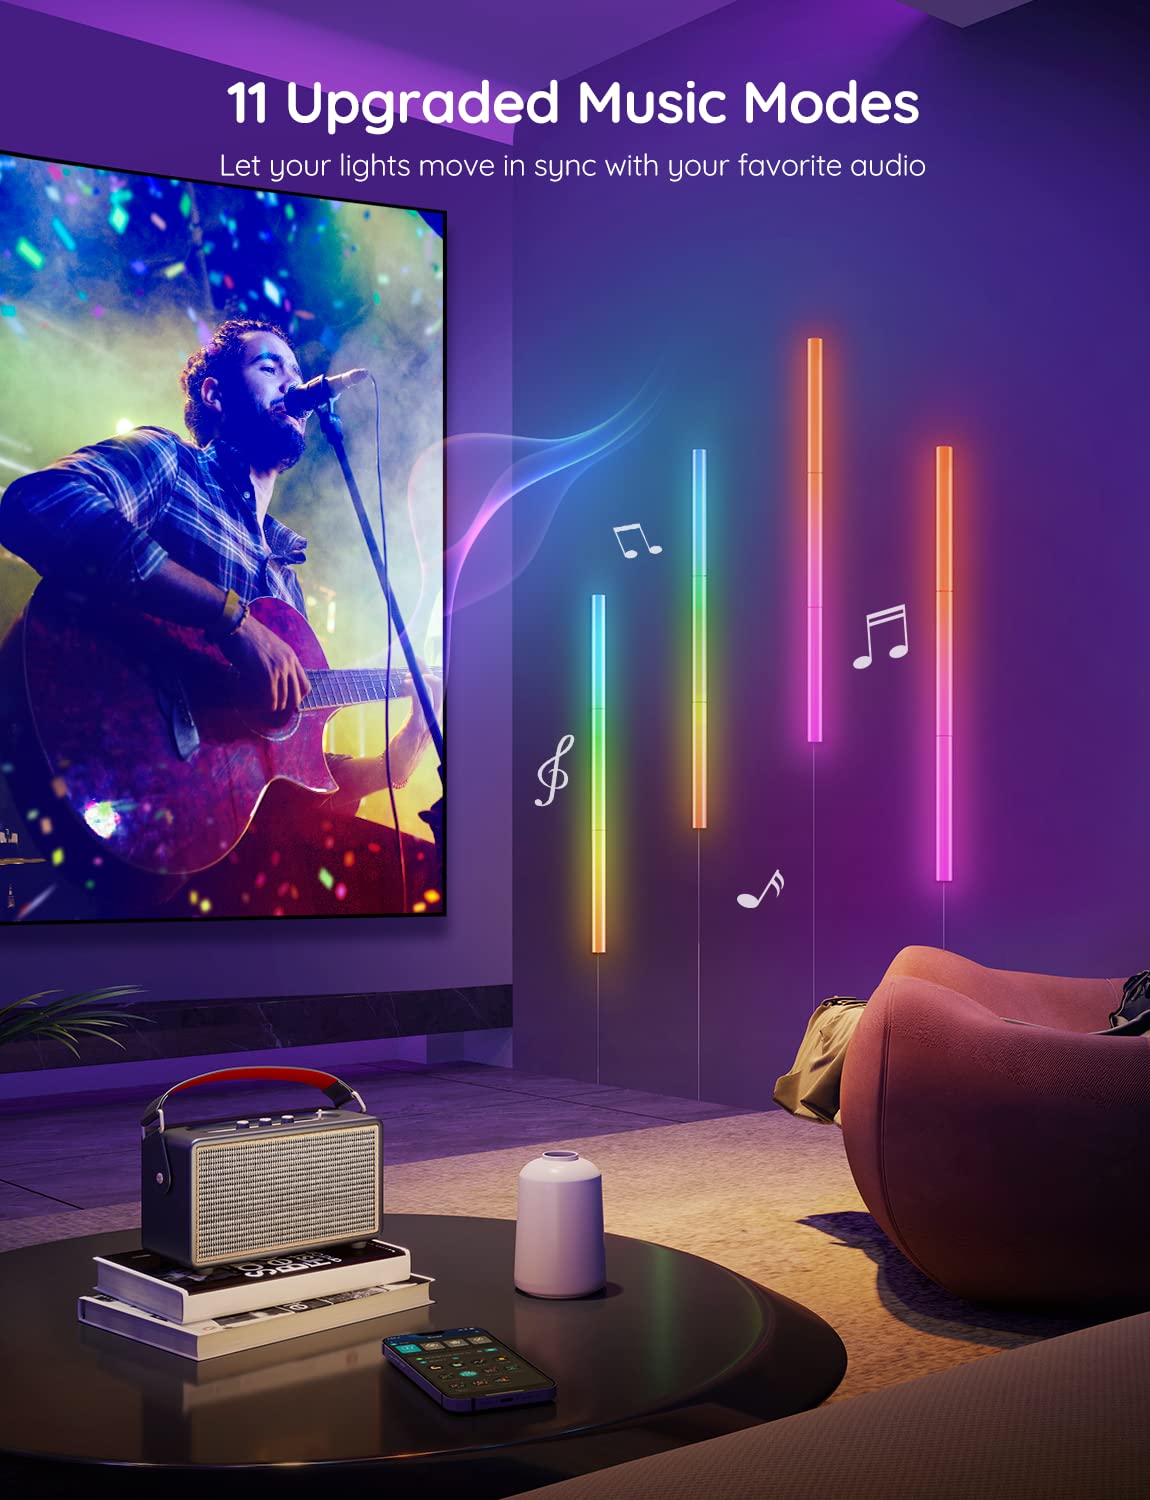 Govee Glide LED Wall Lights, RGBIC Wall Lights, Works with Alexa and Google Assistant, Smart Glide Lively Light Bars for Gaming Room Decor and Streaming, Multicolor Glide Sconces, Music Sync, 6 pcs